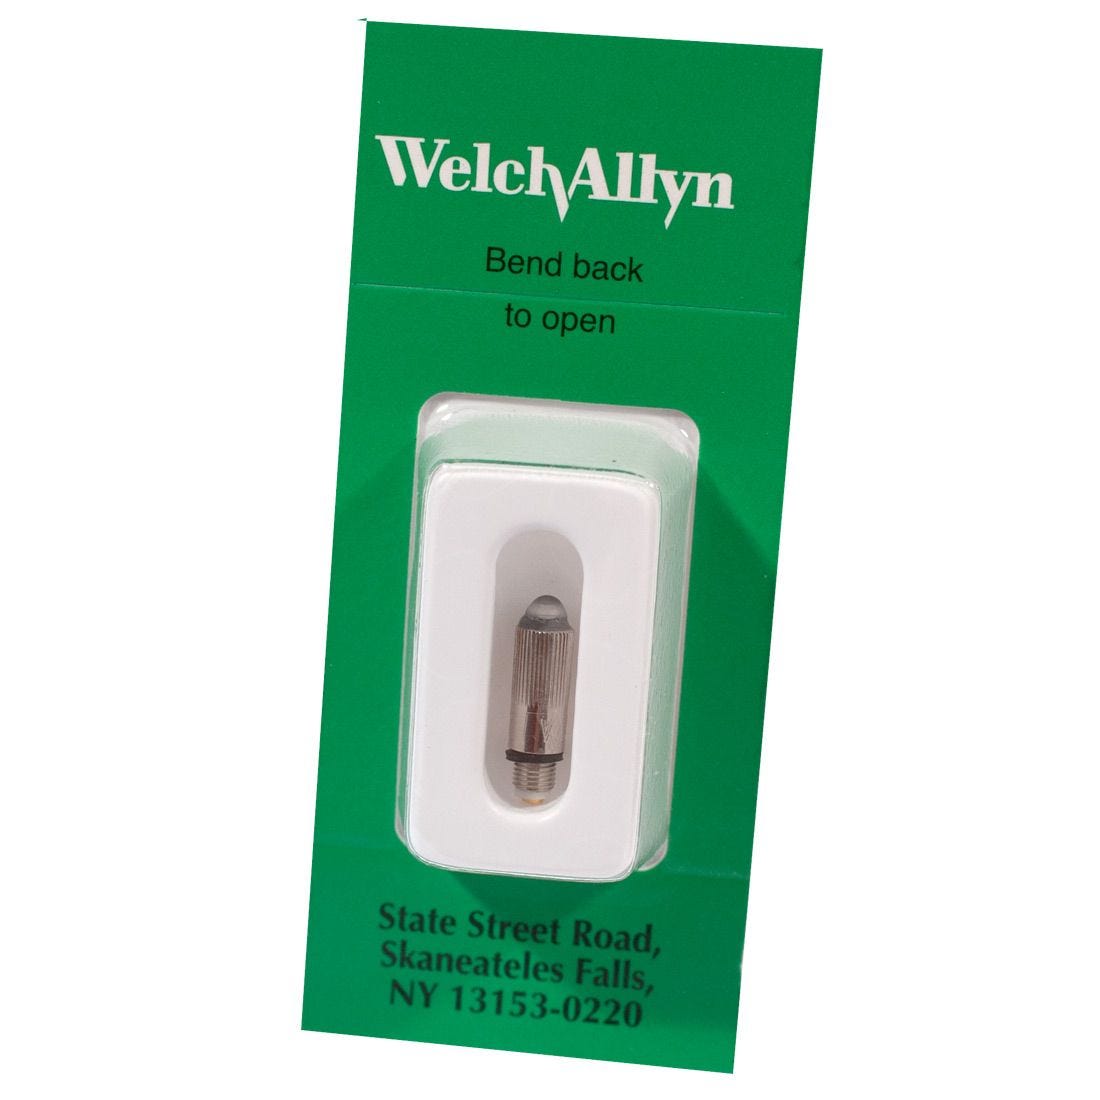 Welch Allyn Replacement Lamps - Small, Fits blade size 0, 1 & 2